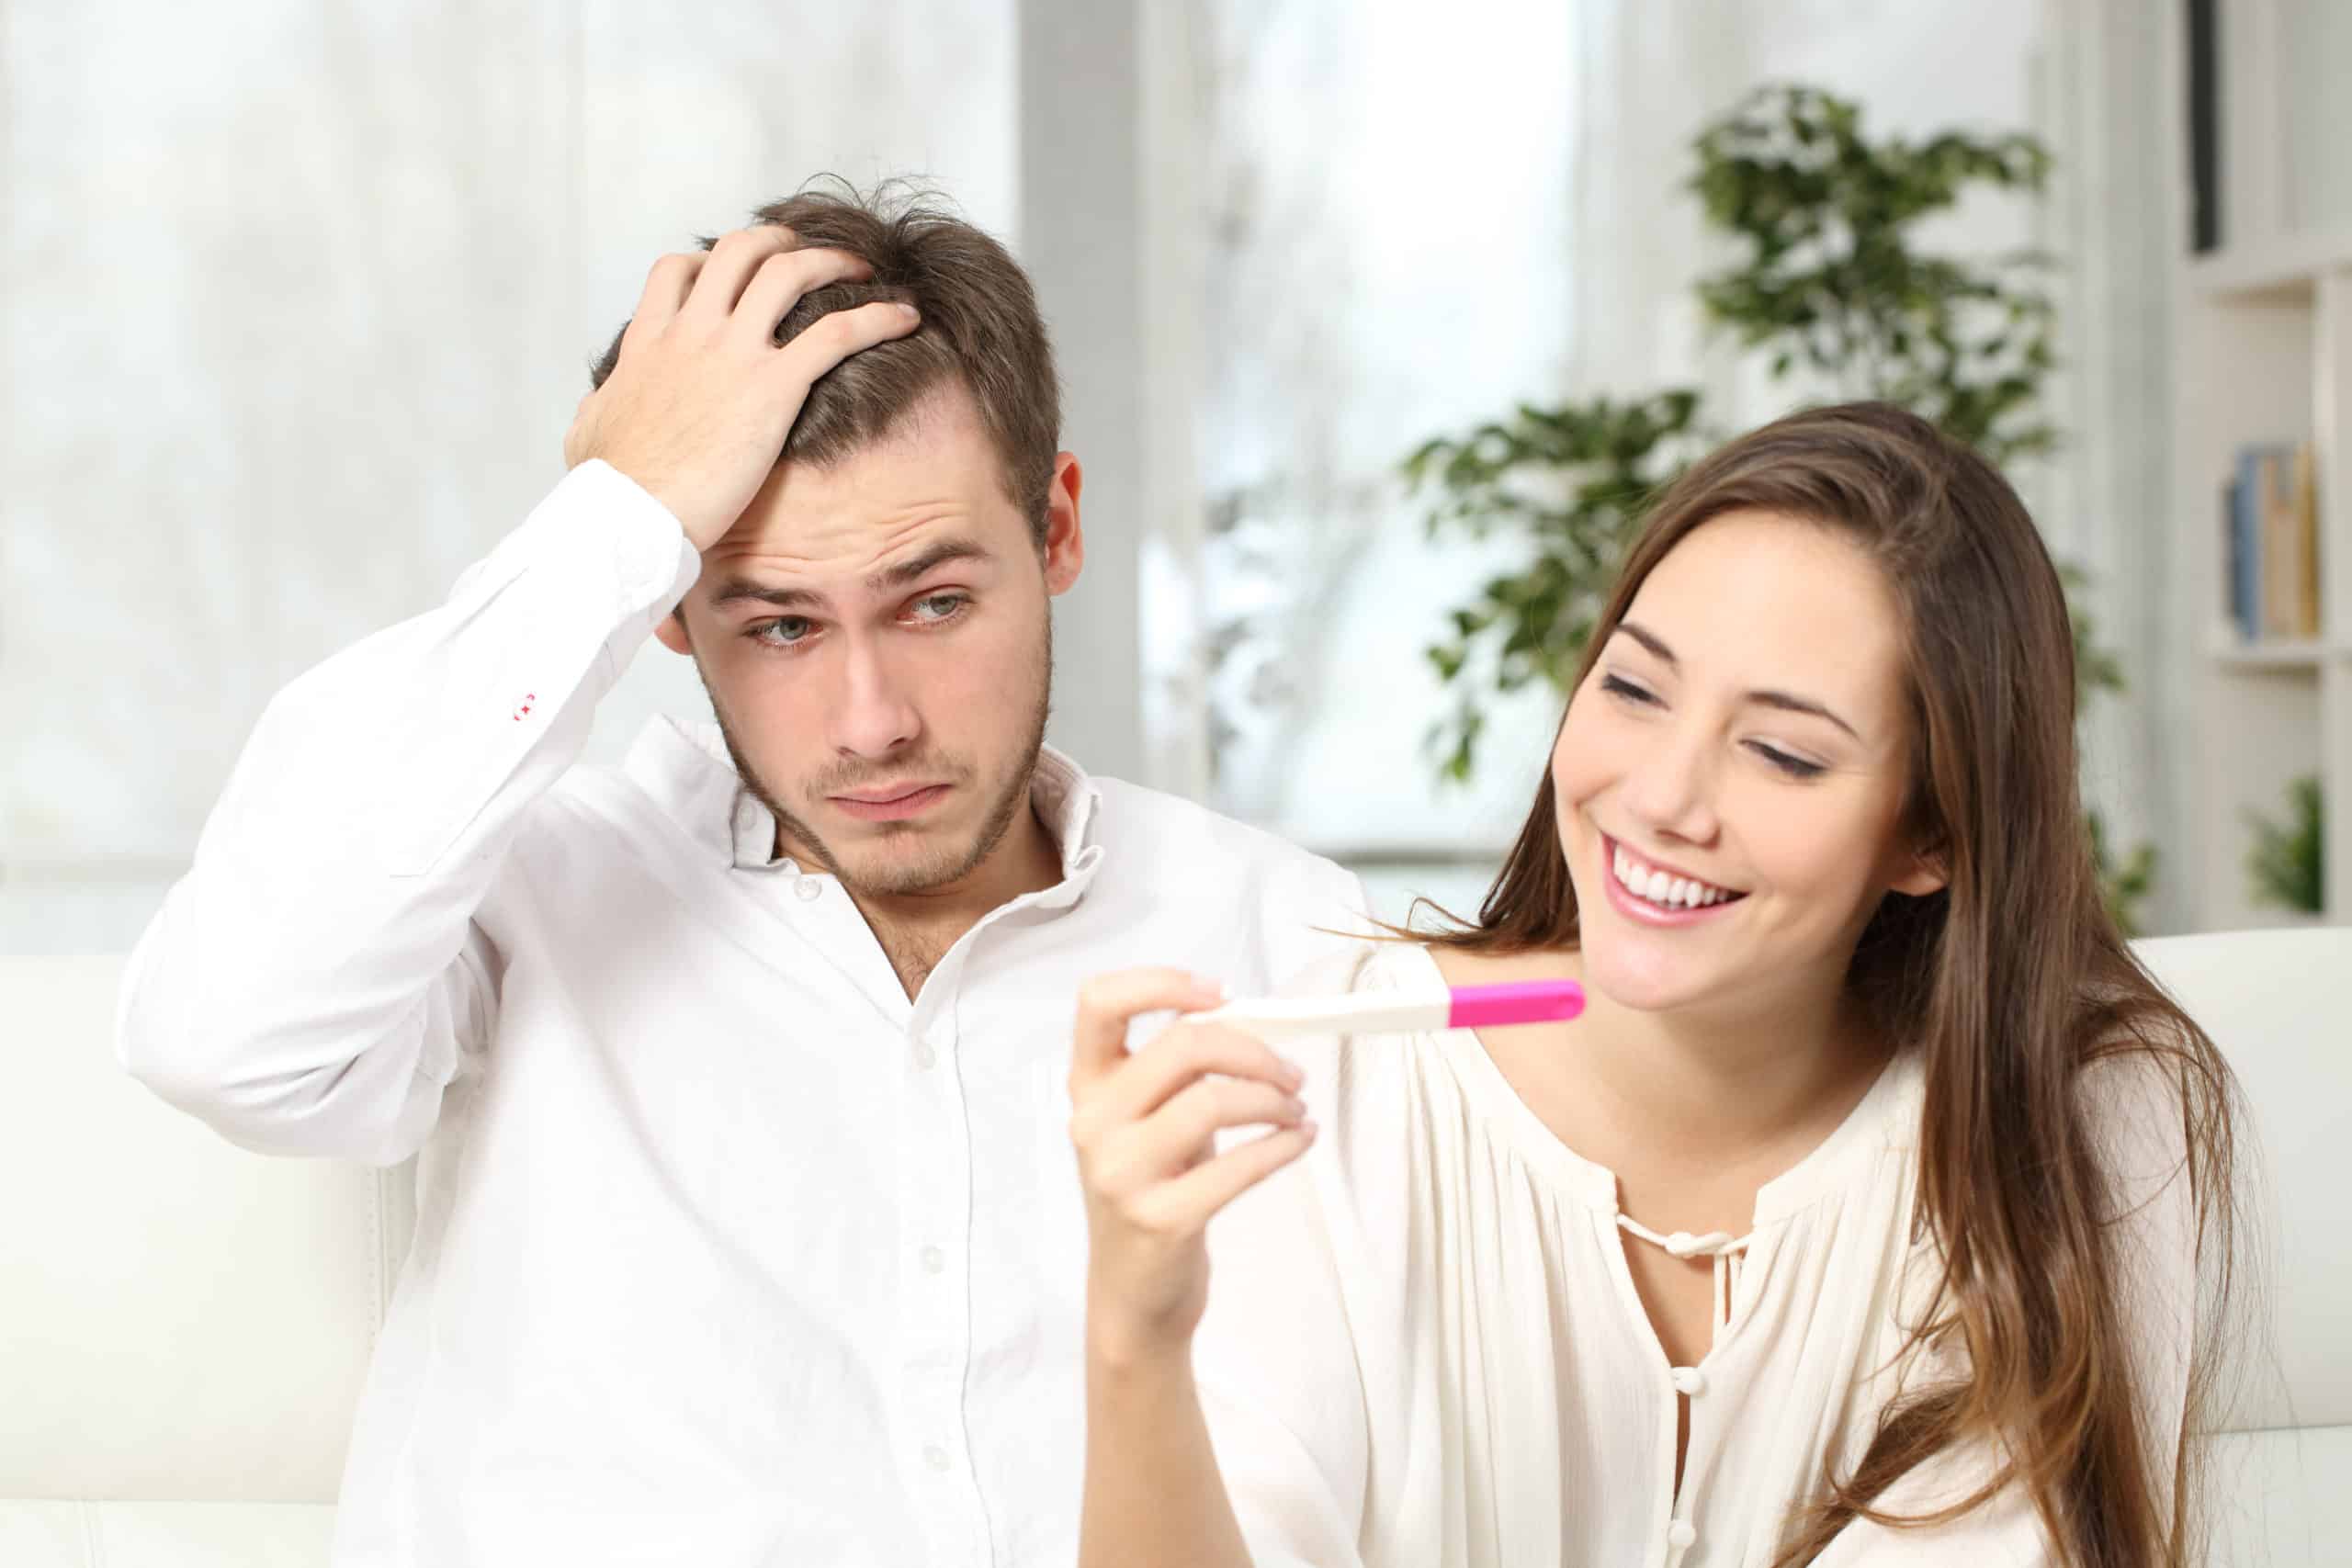 Not Ready Worried Man Checking A Pregnancy Test With His